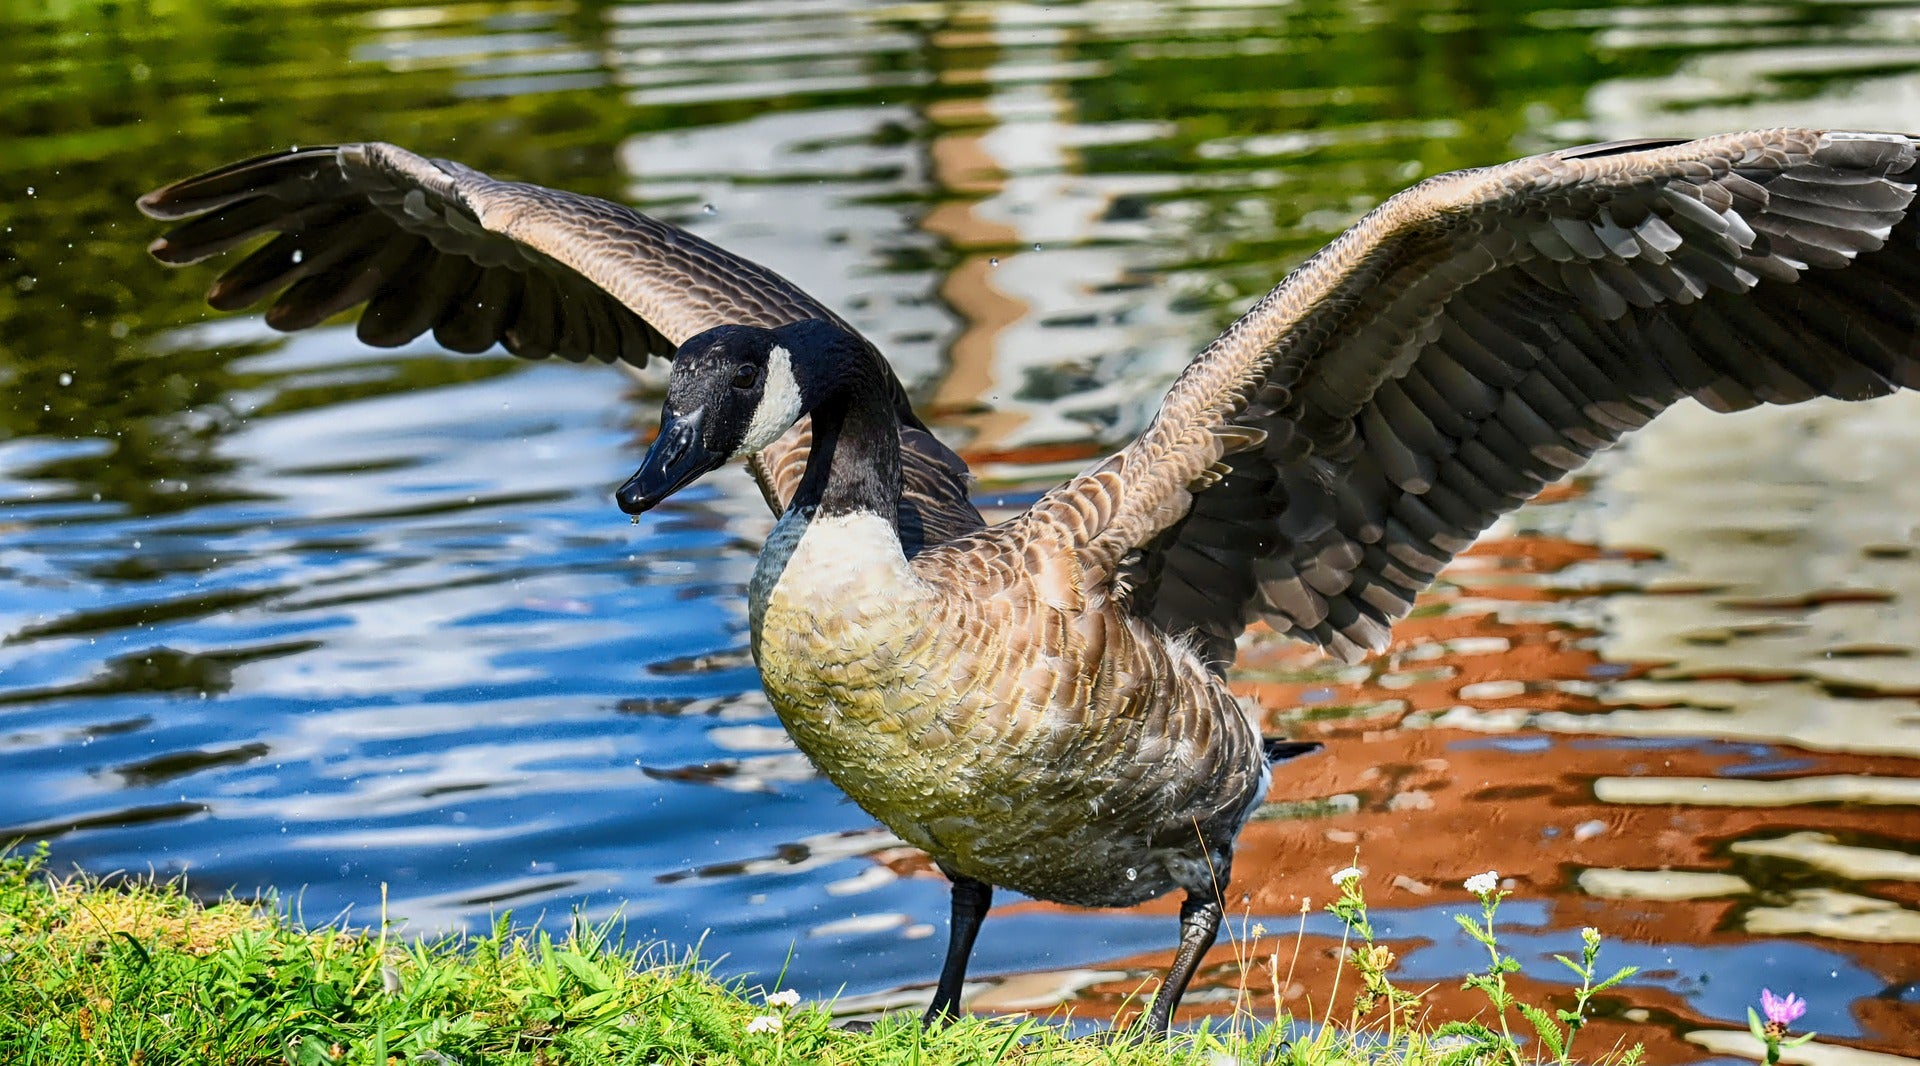  goose with wings outstretched